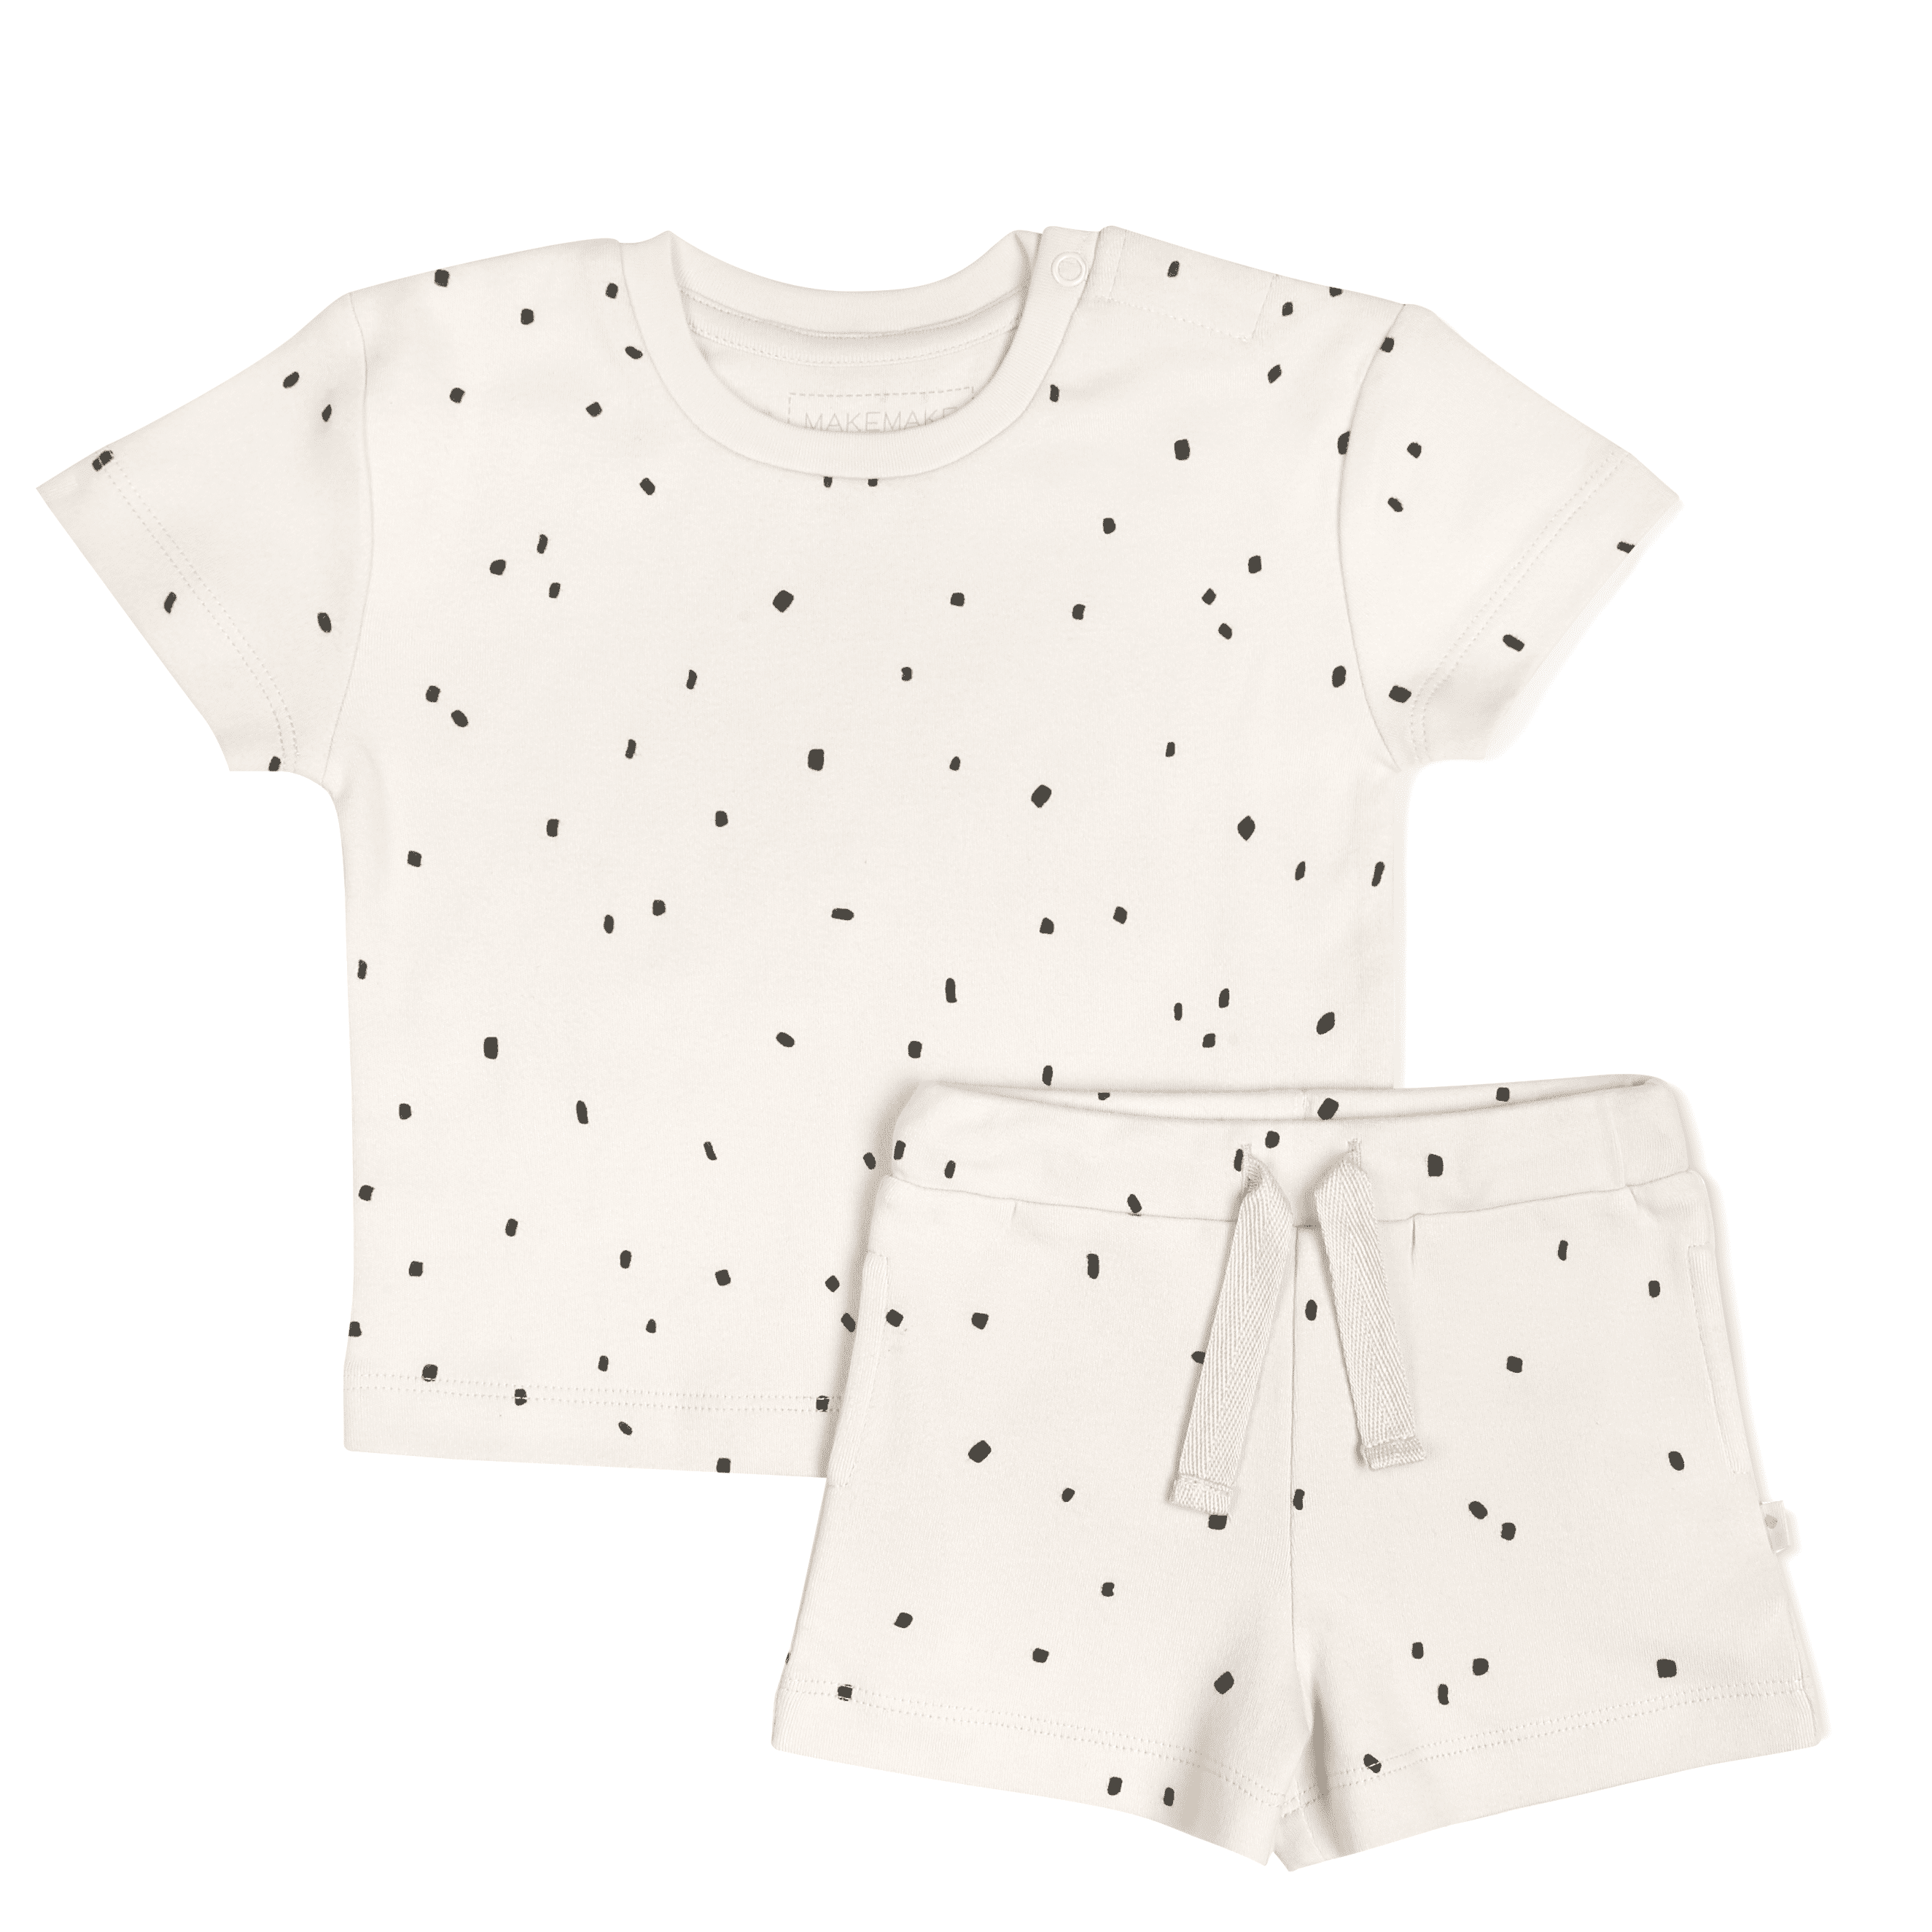 Organic Tee And Shorts Set - Pixie Dots